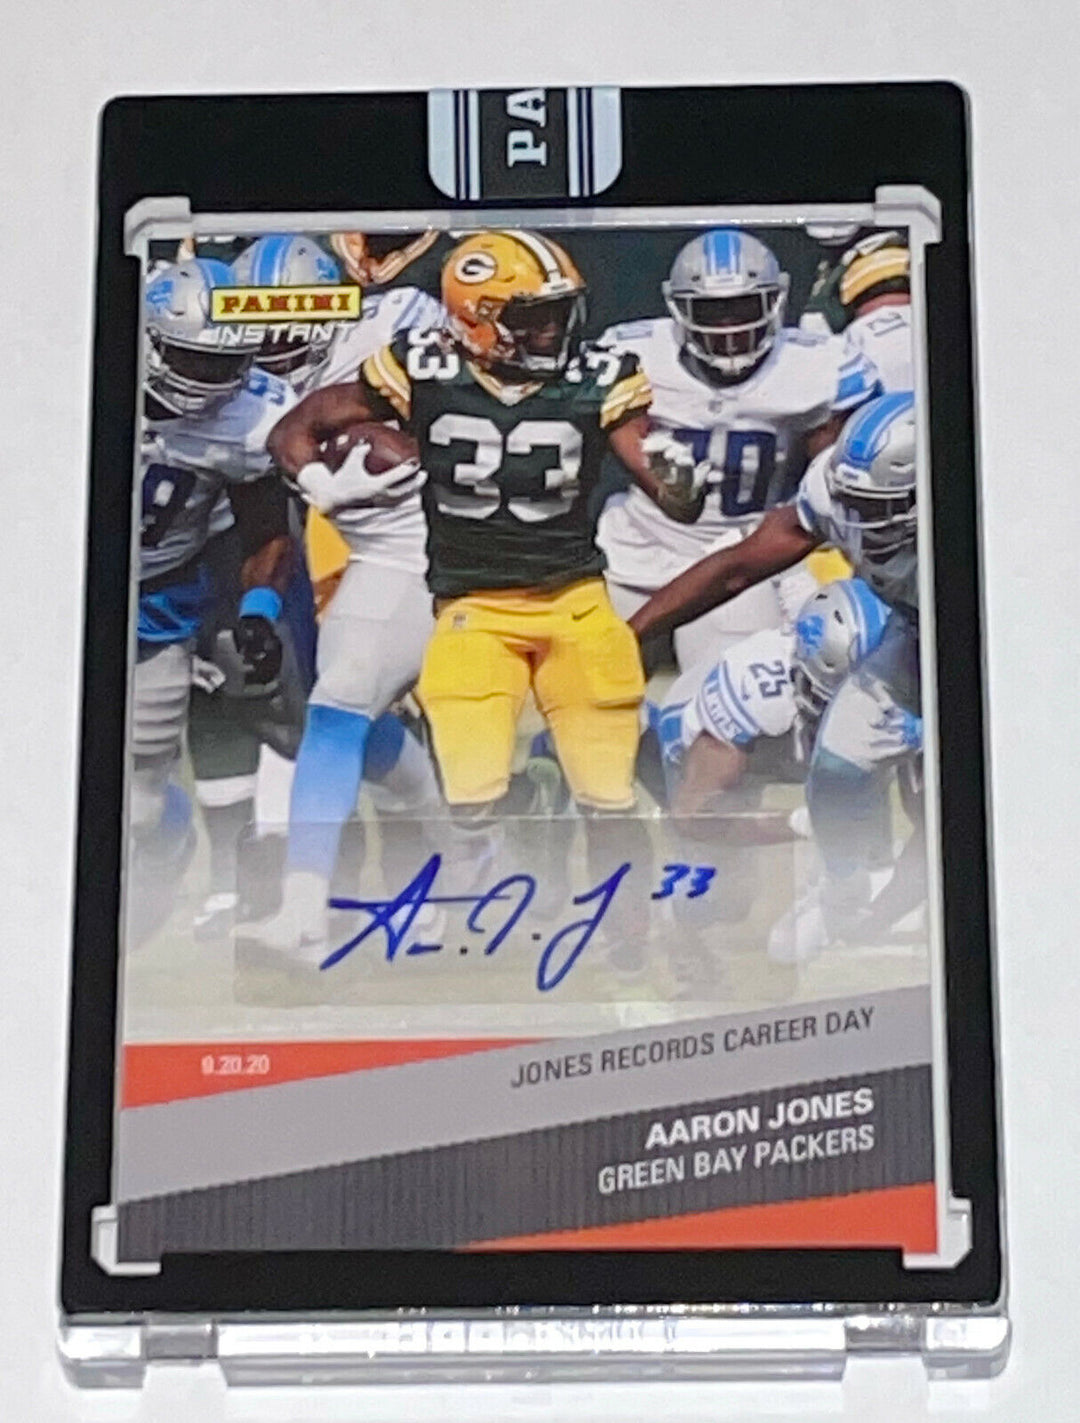 2020 AARON JONES RECORDS CAREER DAY SIGNED PANINI INSTANT PACKERS AUTO CARD #26 Image 3